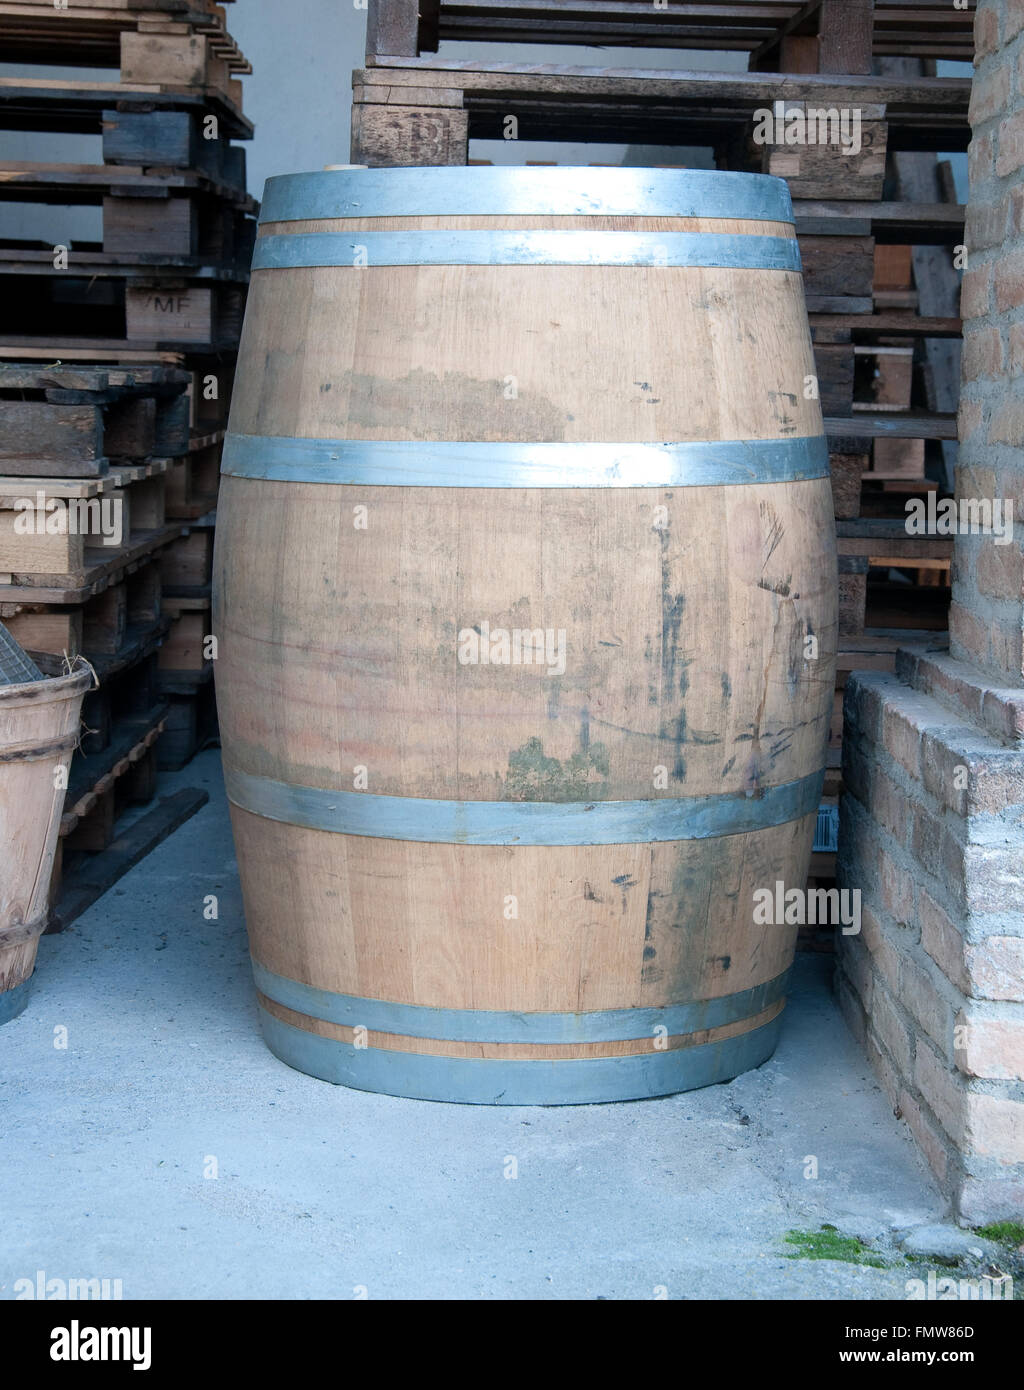 Wooden barrels used to contain wine,italy Stock Photo